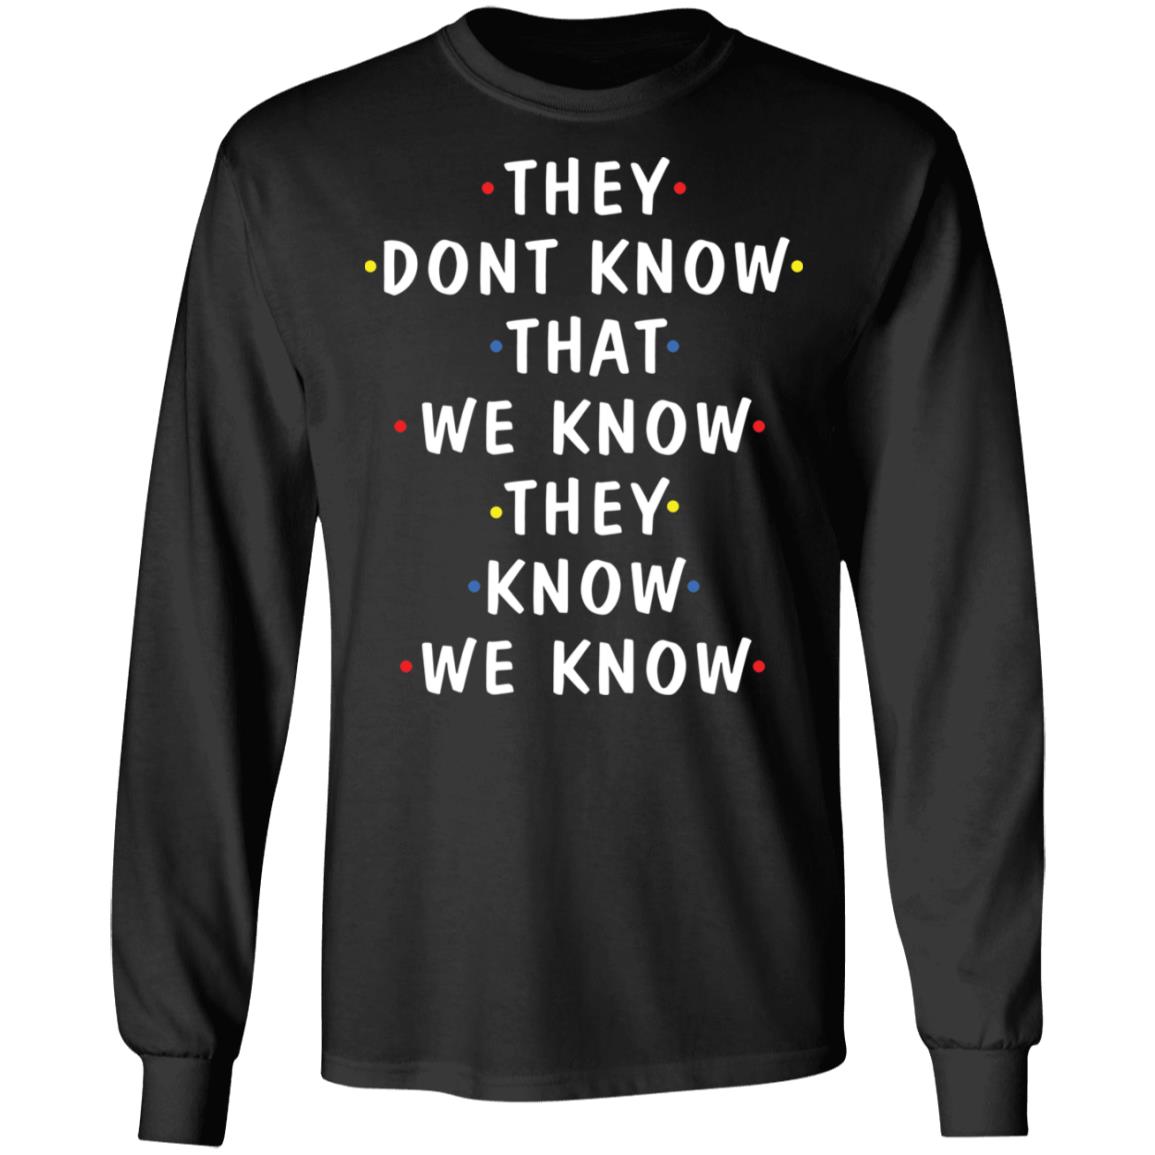 They don't know that we know they know we know shirt - Rockatee